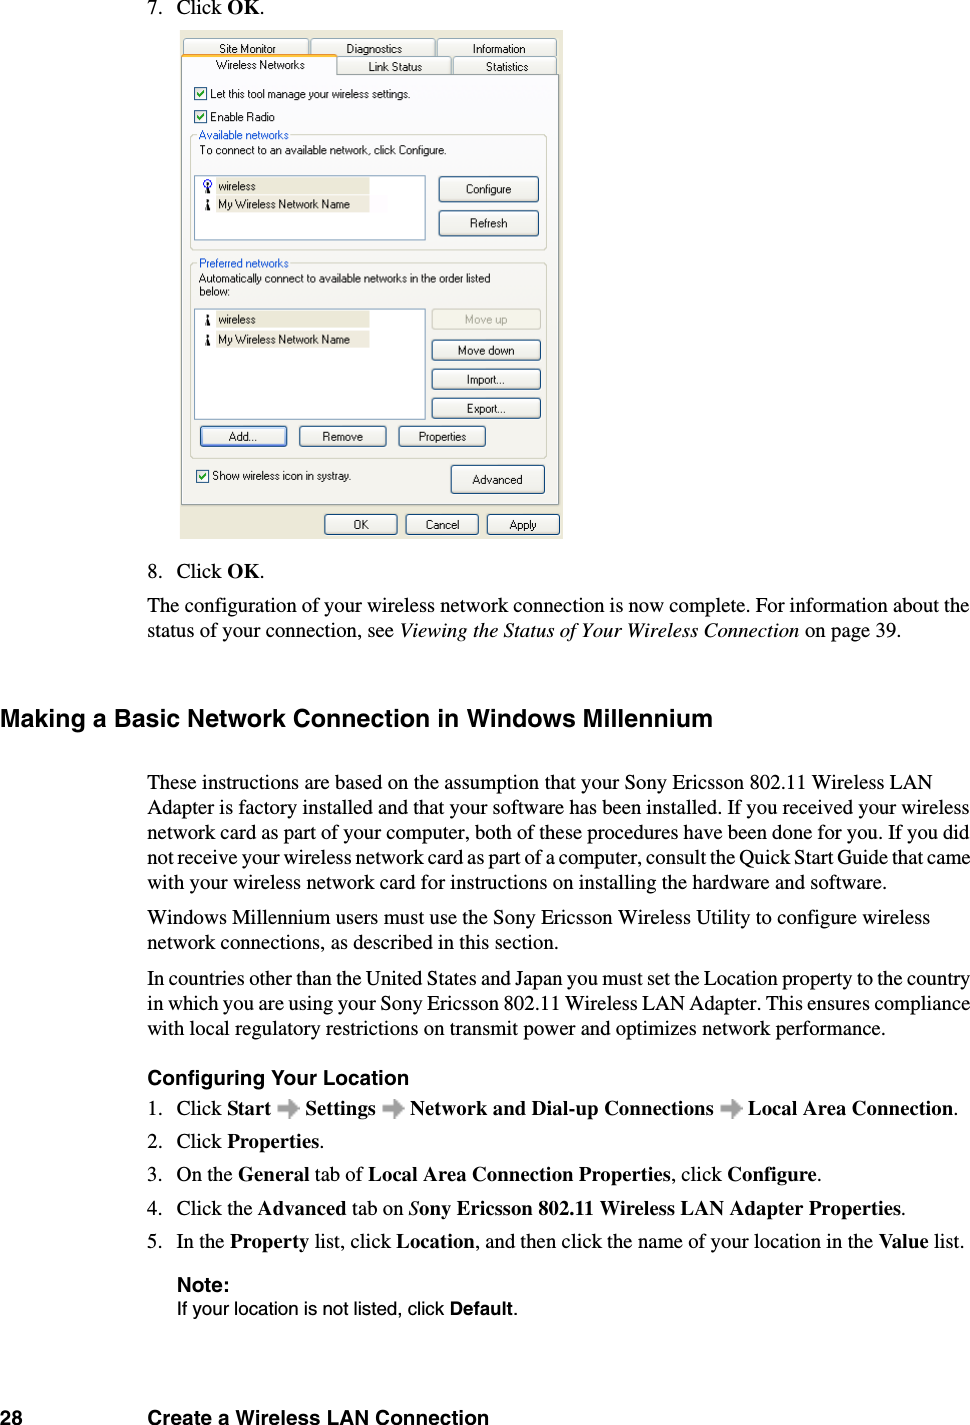 28 Create a Wireless LAN Connection7. Click OK. 8. Click OK. The configuration of your wireless network connection is now complete. For information about the status of your connection, see Viewing the Status of Your Wireless Connection on page 39. Making a Basic Network Connection in Windows MillenniumThese instructions are based on the assumption that your Sony Ericsson 802.11 Wireless LAN Adapter is factory installed and that your software has been installed. If you received your wireless network card as part of your computer, both of these procedures have been done for you. If you did not receive your wireless network card as part of a computer, consult the Quick Start Guide that came with your wireless network card for instructions on installing the hardware and software. Windows Millennium users must use the Sony Ericsson Wireless Utility to configure wireless network connections, as described in this section. In countries other than the United States and Japan you must set the Location property to the country in which you are using your Sony Ericsson 802.11 Wireless LAN Adapter. This ensures compliance with local regulatory restrictions on transmit power and optimizes network performance. Configuring Your Location1. Click Start   Settings   Network and Dial-up Connections   Local Area Connection. 2. Click Properties. 3. On the General tab of Local Area Connection Properties, click Configure. 4. Click the Advanced tab on Sony Ericsson 802.11 Wireless LAN Adapter Properties. 5. In the Property list, click Location, and then click the name of your location in the Value list. Note:If your location is not listed, click Default. 